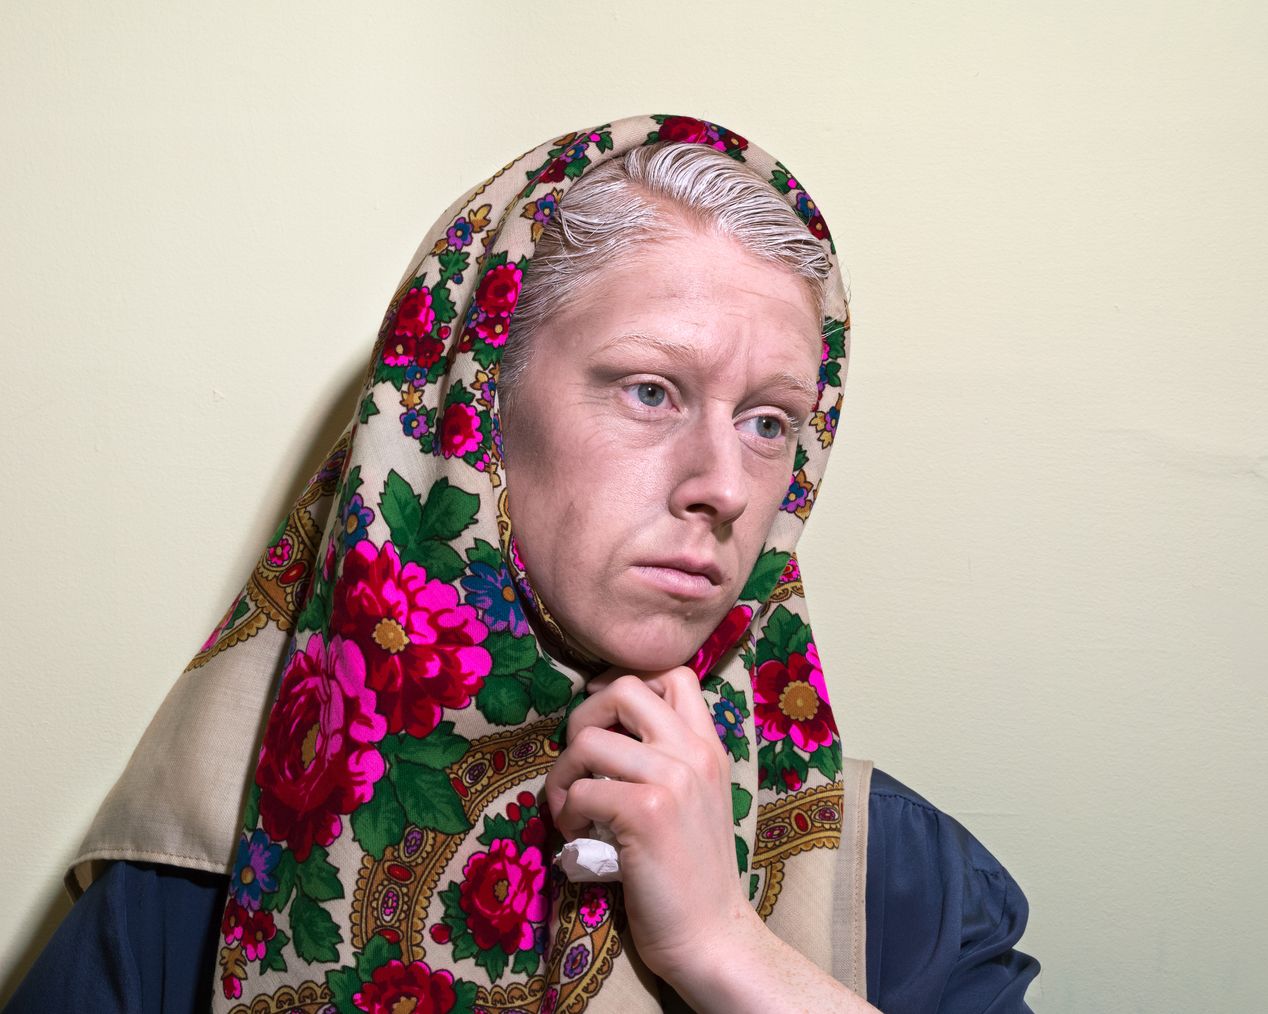 The model is transformed to an older woman, a babushka, art photography, Ilona Szwarc, contemporary Los Angeles artist.